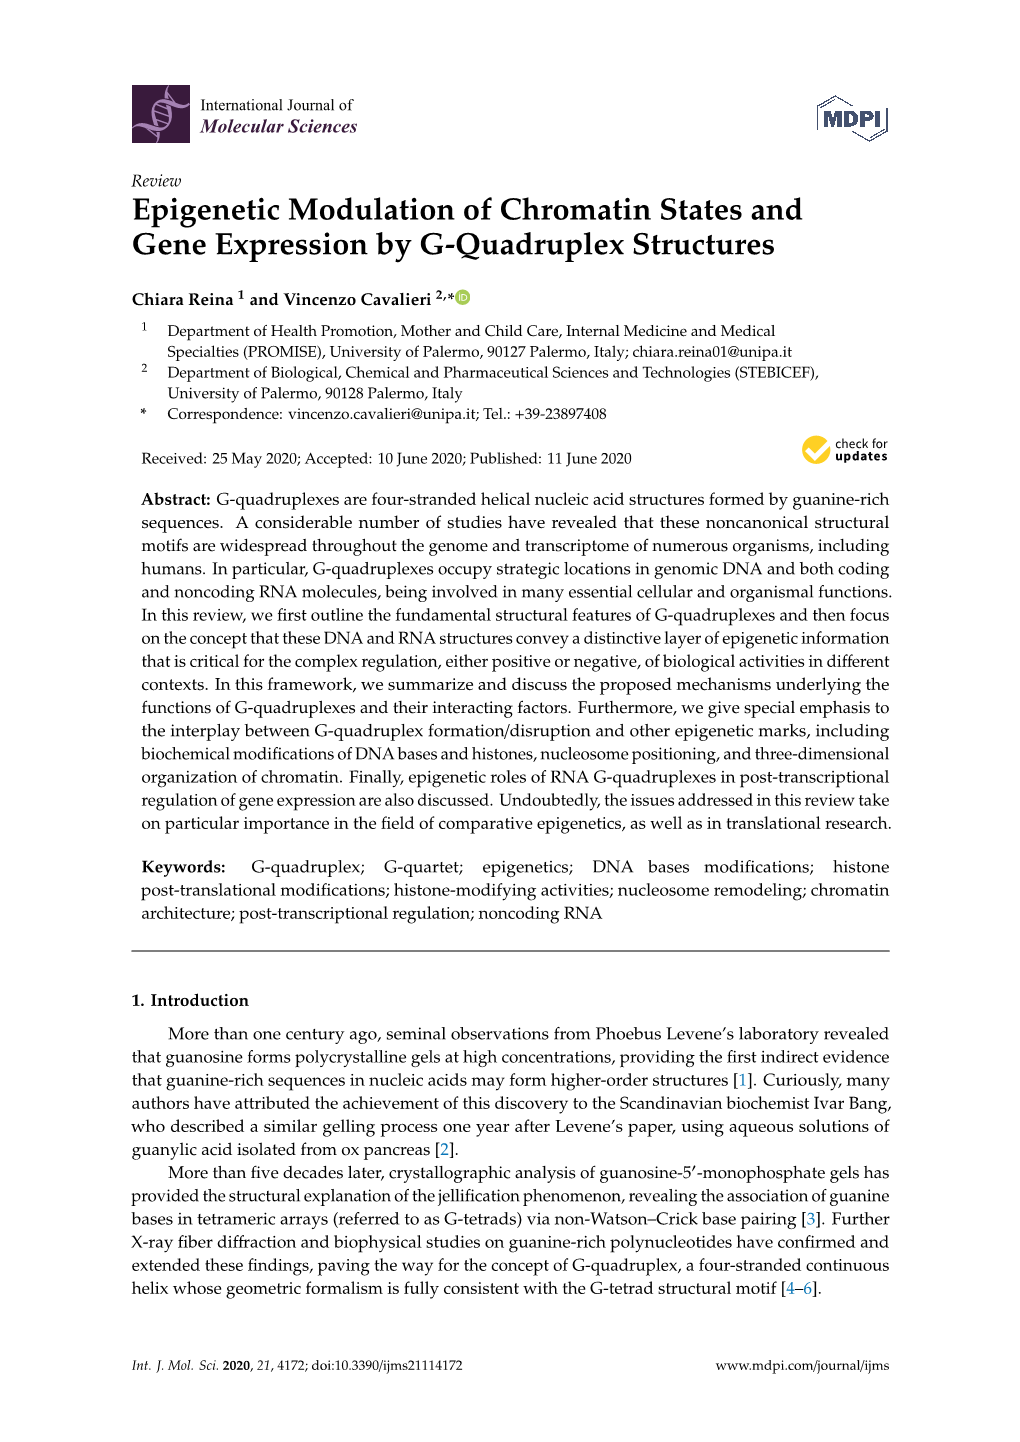 Epigenetic Modulation of Chromatin States and Gene Expression by G-Quadruplex Structures